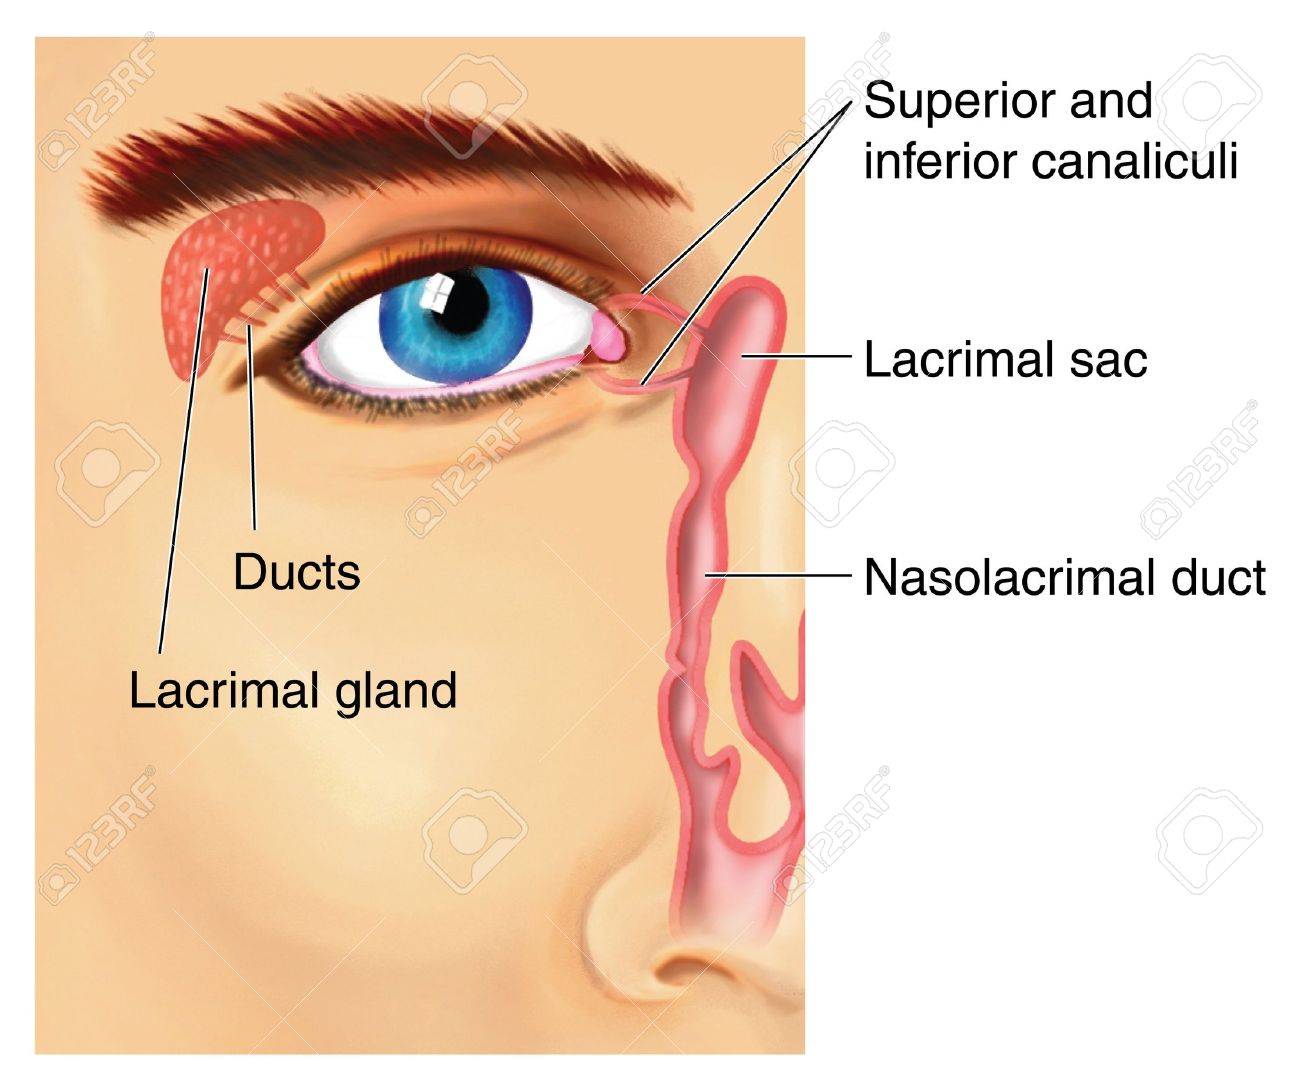 Drawing to show the lacrimal apparatus, with the lacrimal gland producing  fluid that crosses the